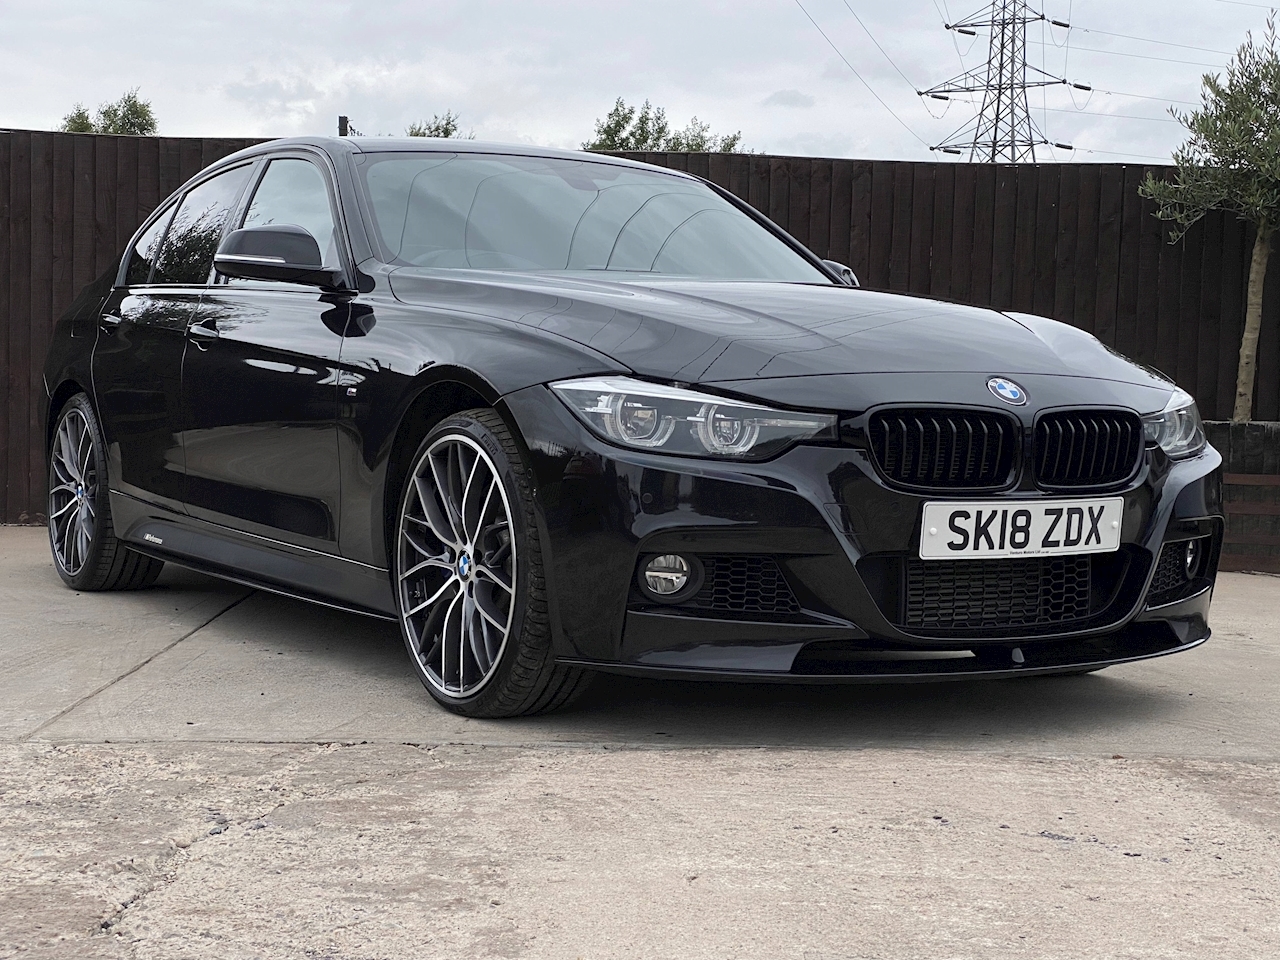 3.0 335d M Sport Shadow Edition Saloon 4dr Diesel Auto xDrive (s/s) (313 ps)